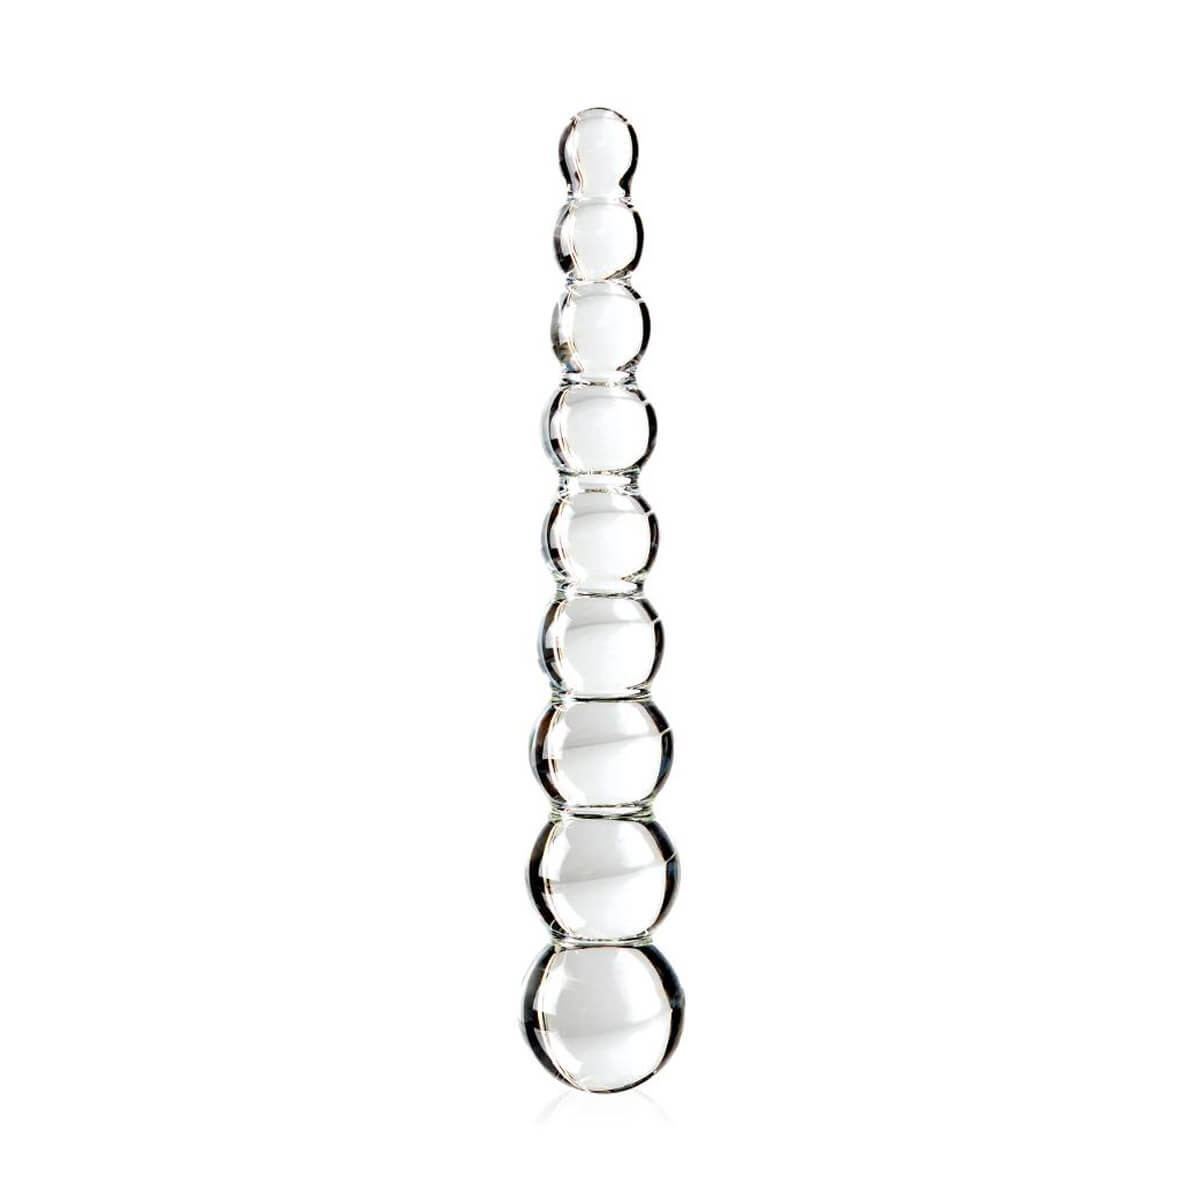 Hand-blown glass beaded dildo over a white background Nudie Co